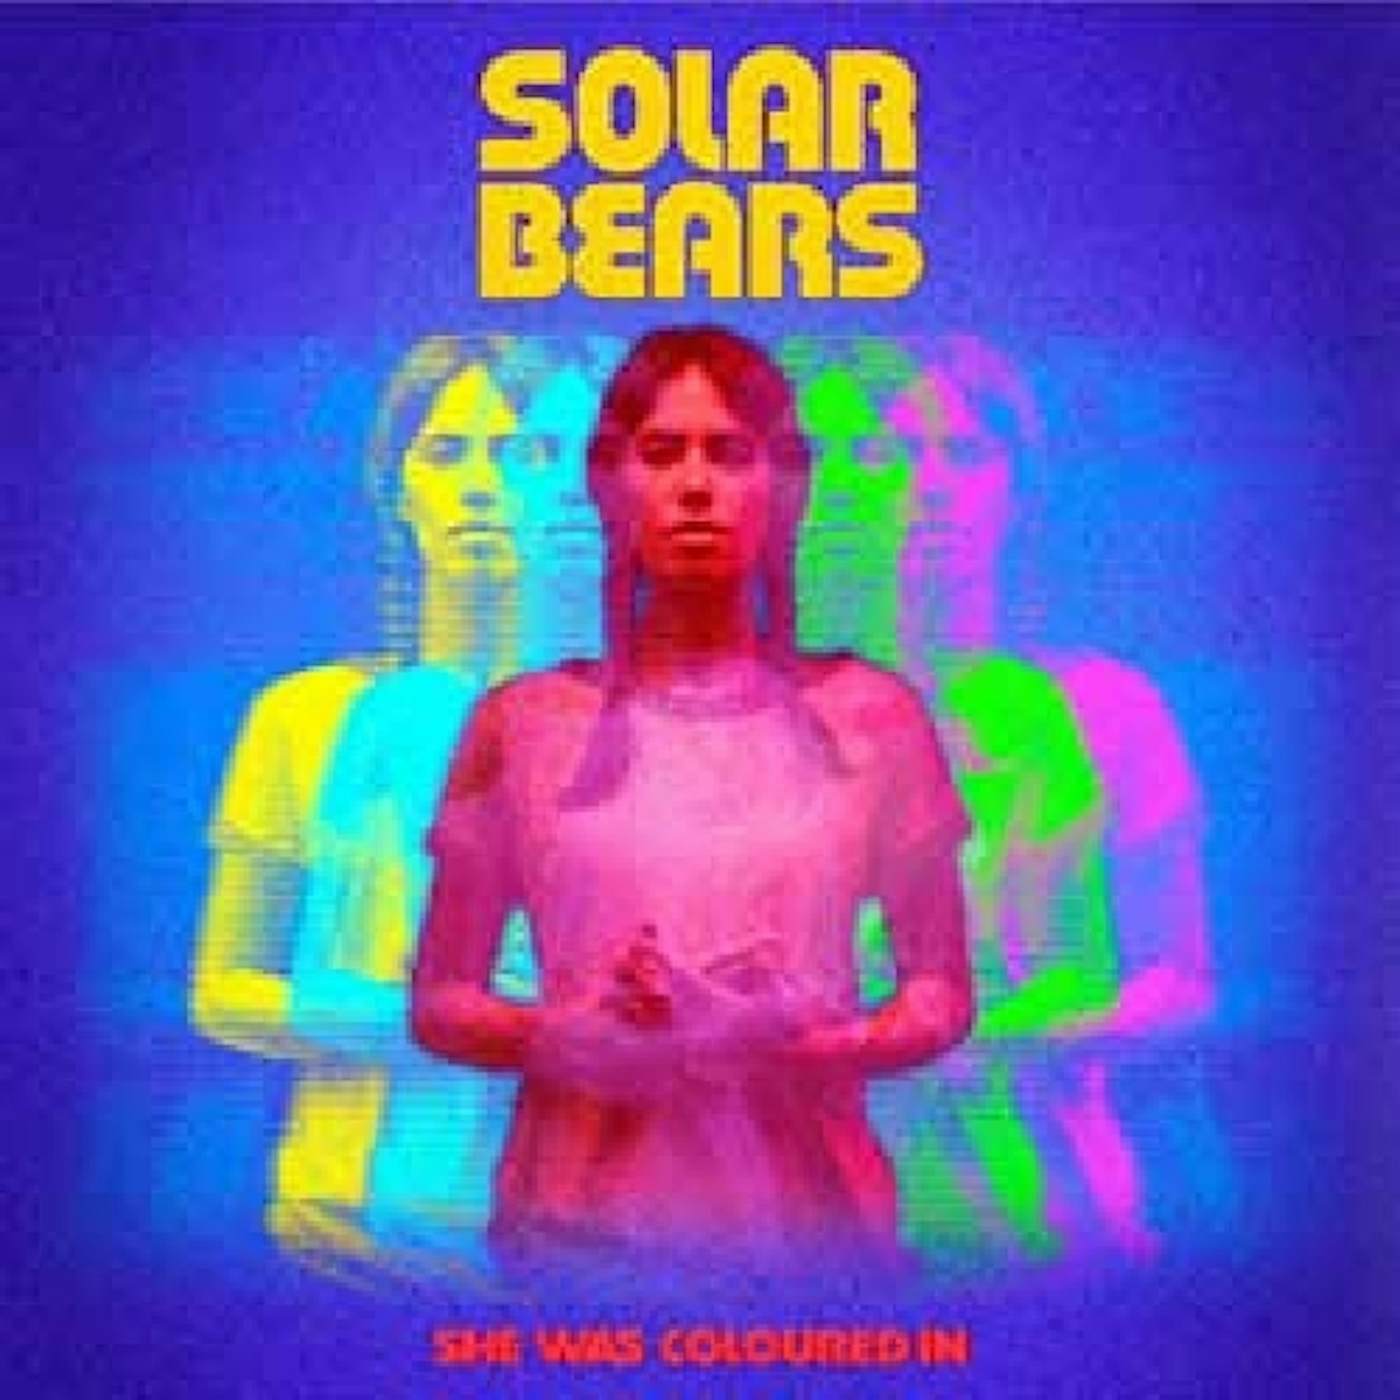 Solar Bears She Was Coloured In Vinyl Record